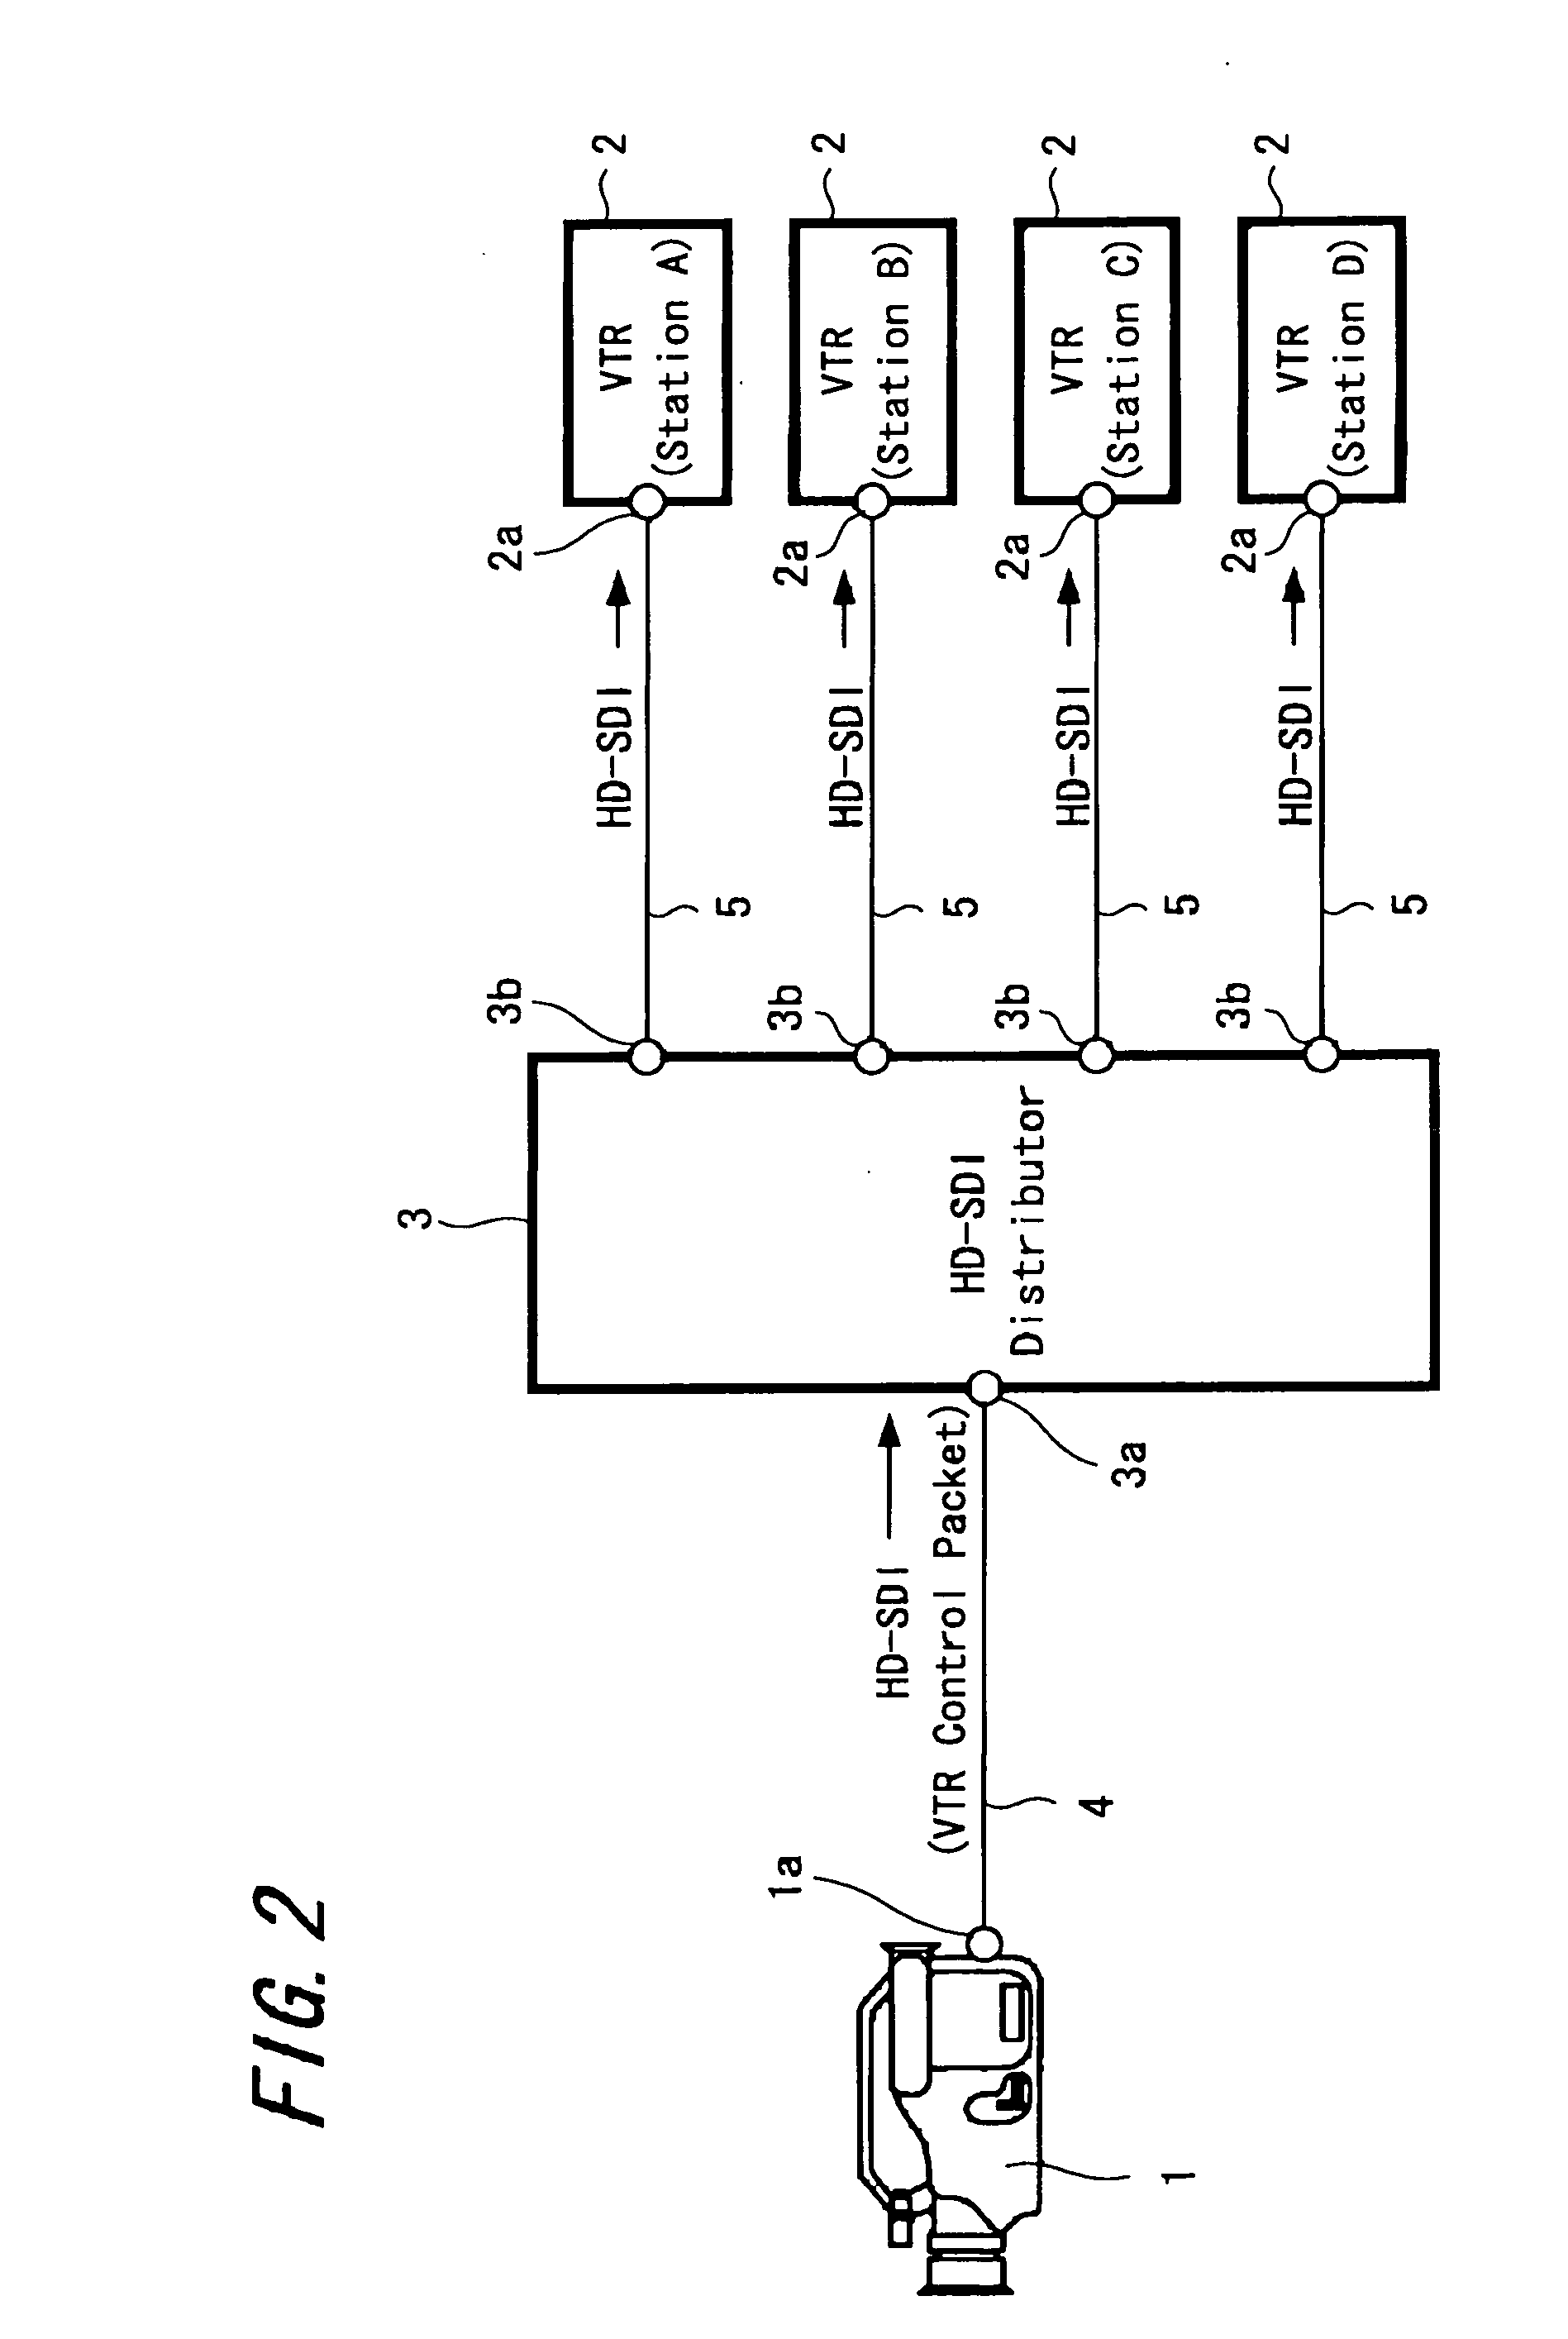 Video recording system, video camera, video recording apparatus, method of controlling video recording apparatus by video camera, and method of recording video signal in video recording